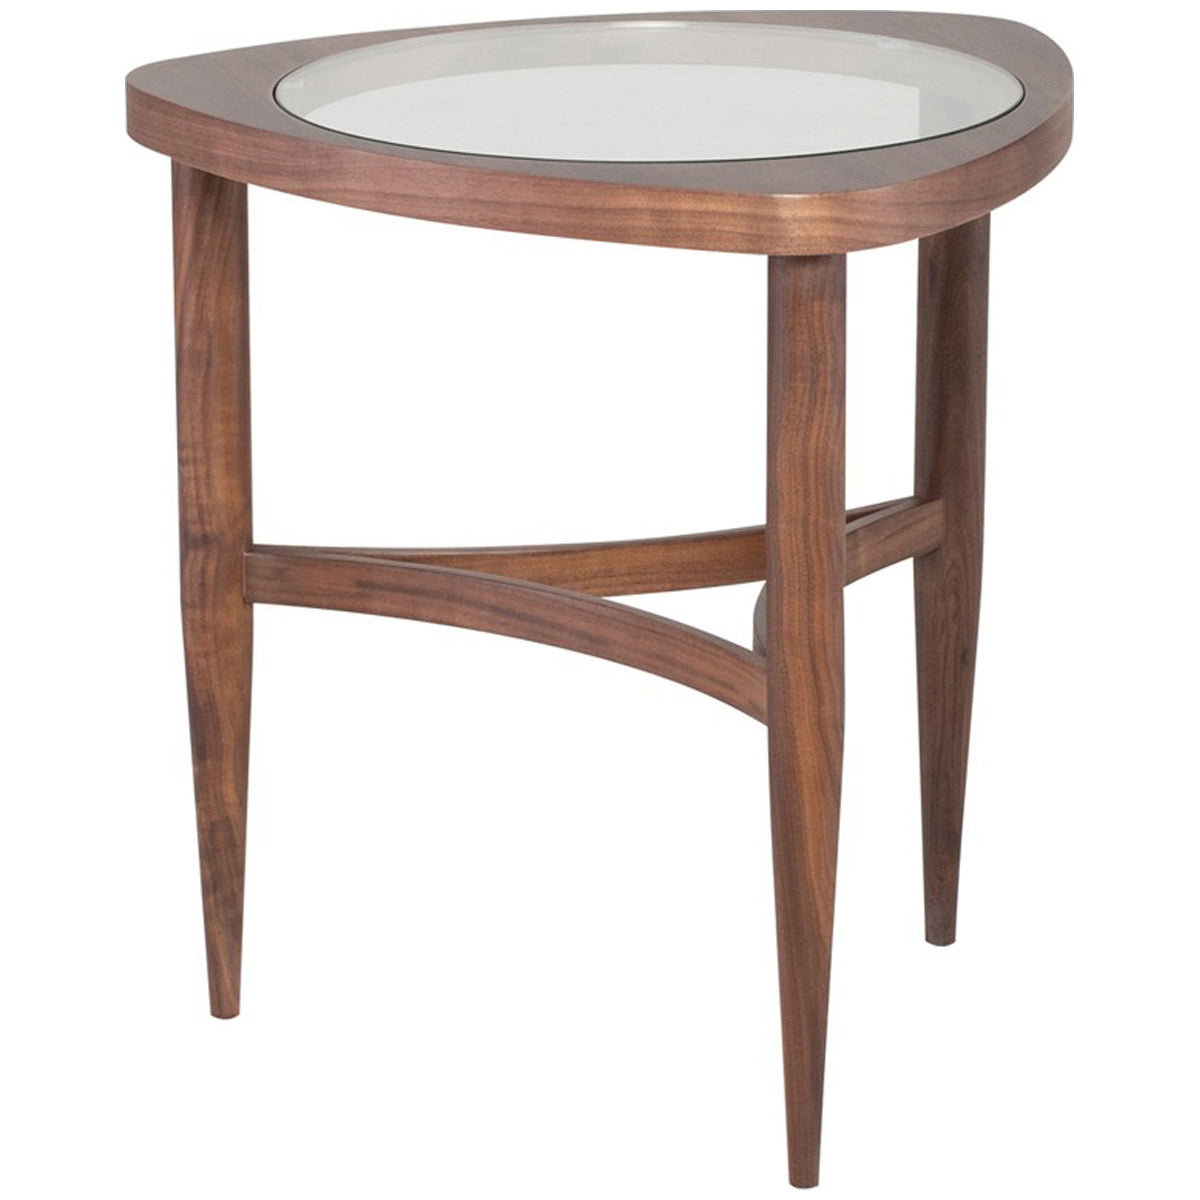 Nuevo Living Isabelle Side Table